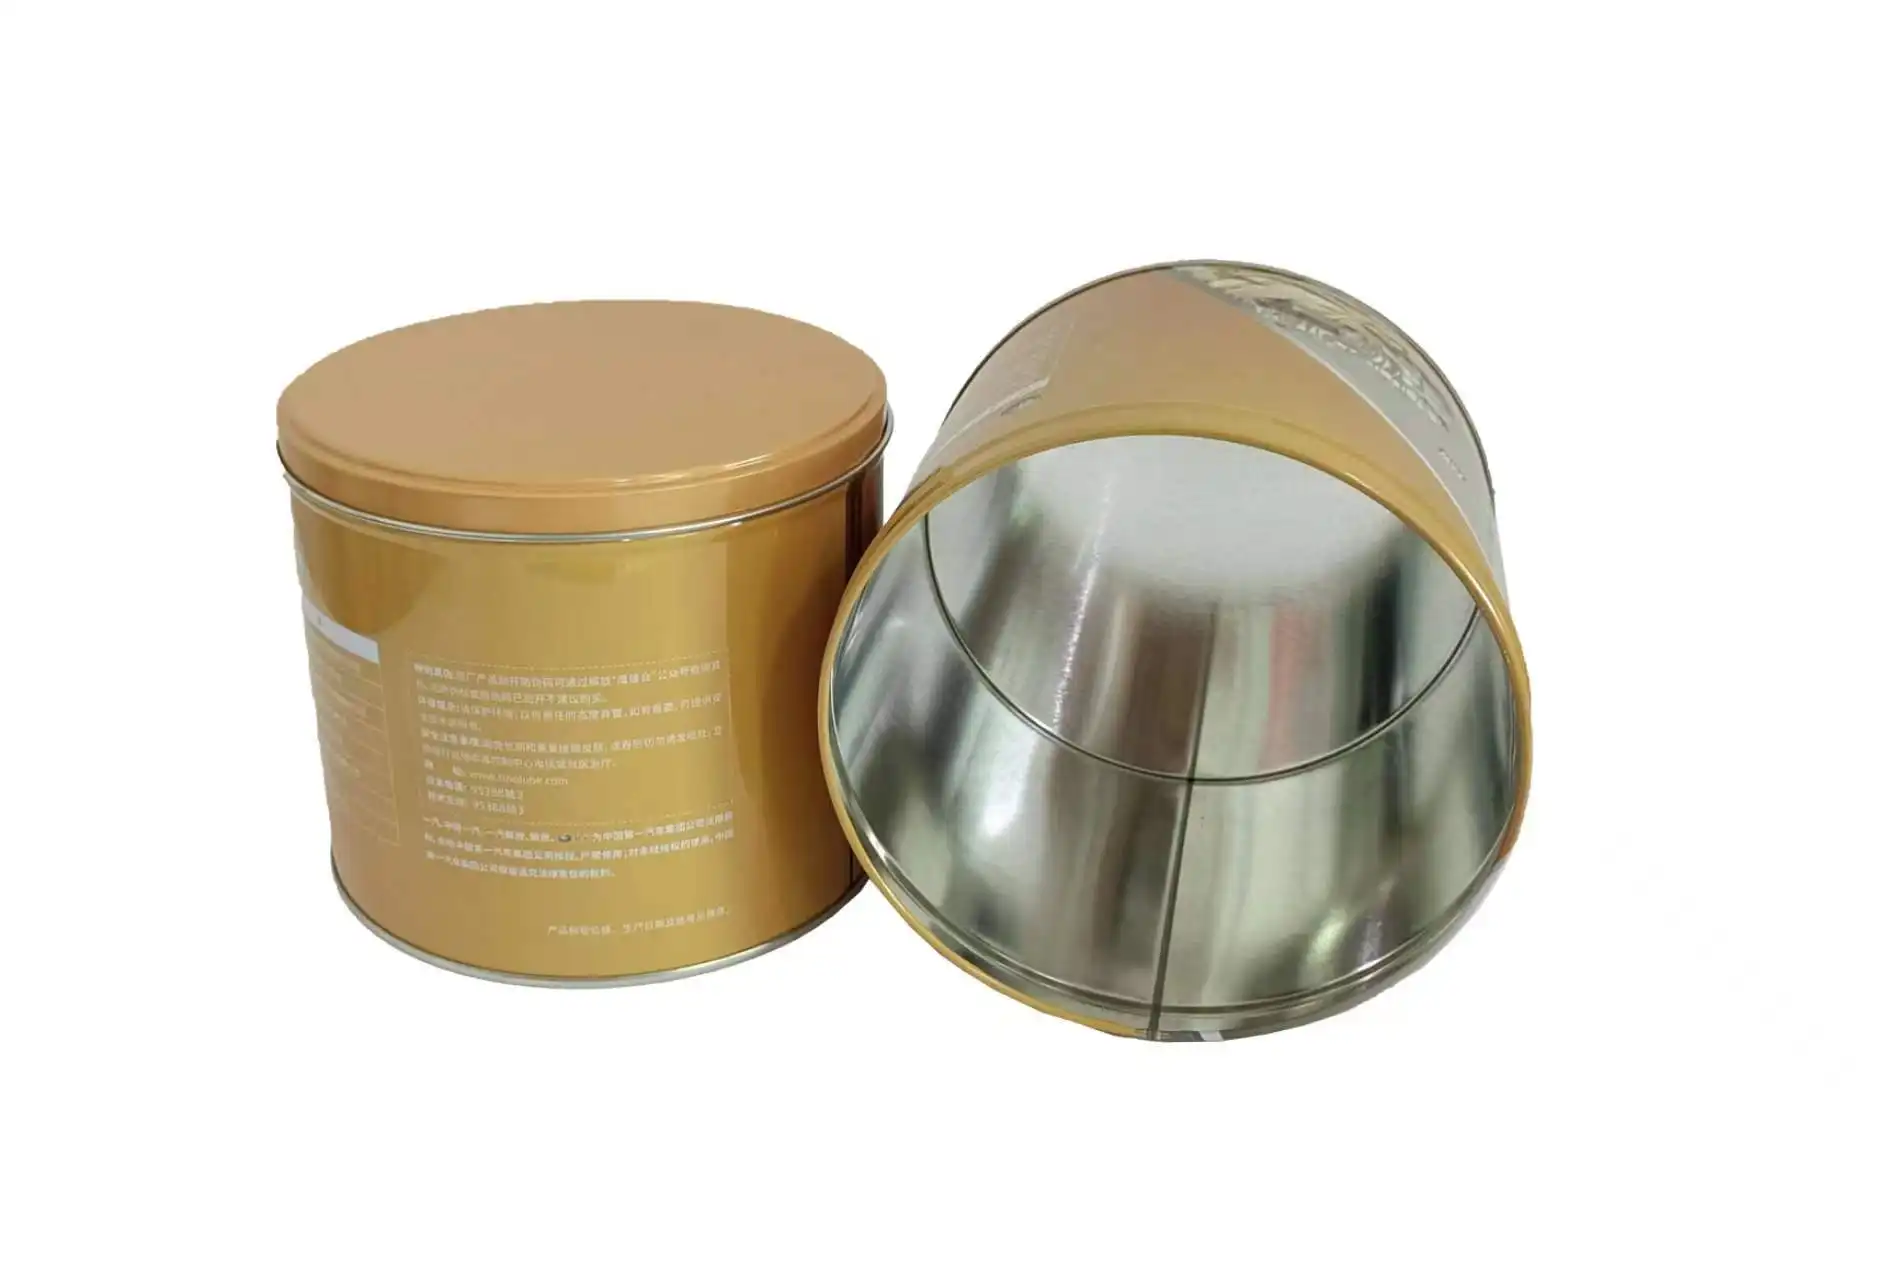 0.8kg\800g Lubricating grease tin can metal barrel with can lid